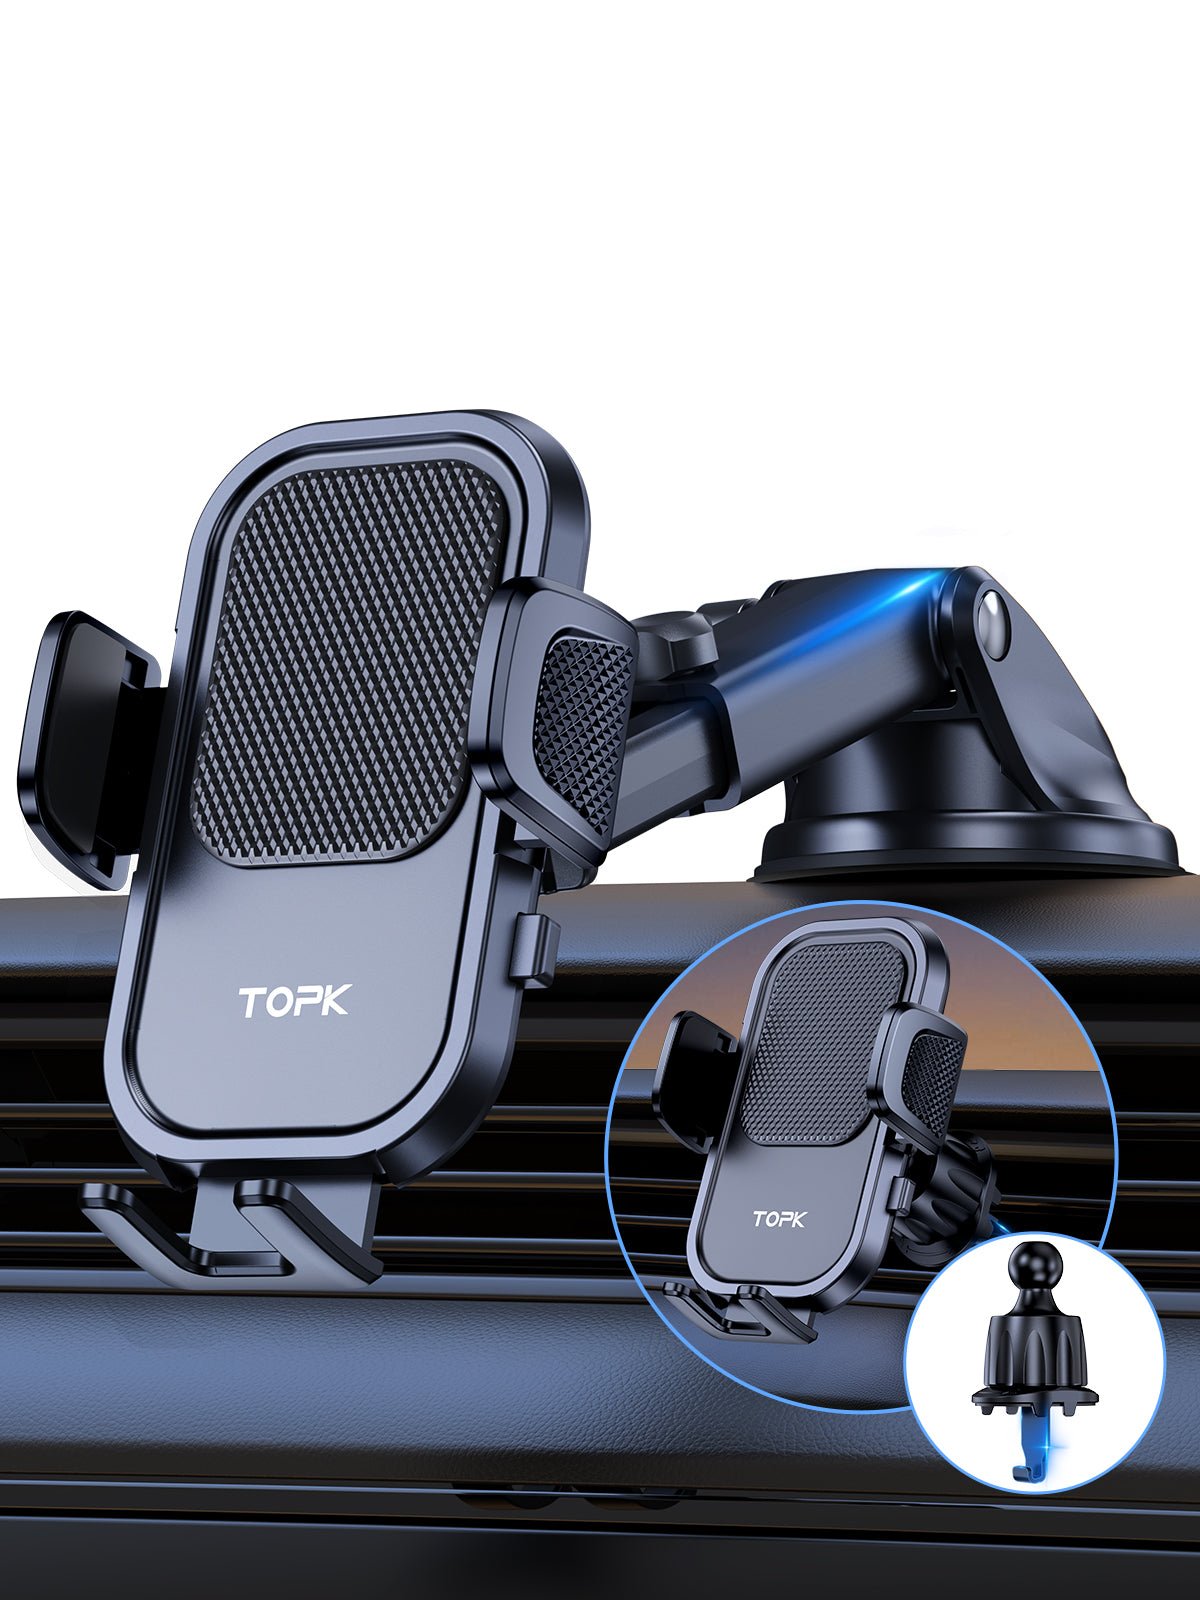 TOPK D40-Z Phone Holder for Dashboard and Car Air Vent - TOPK Official Store